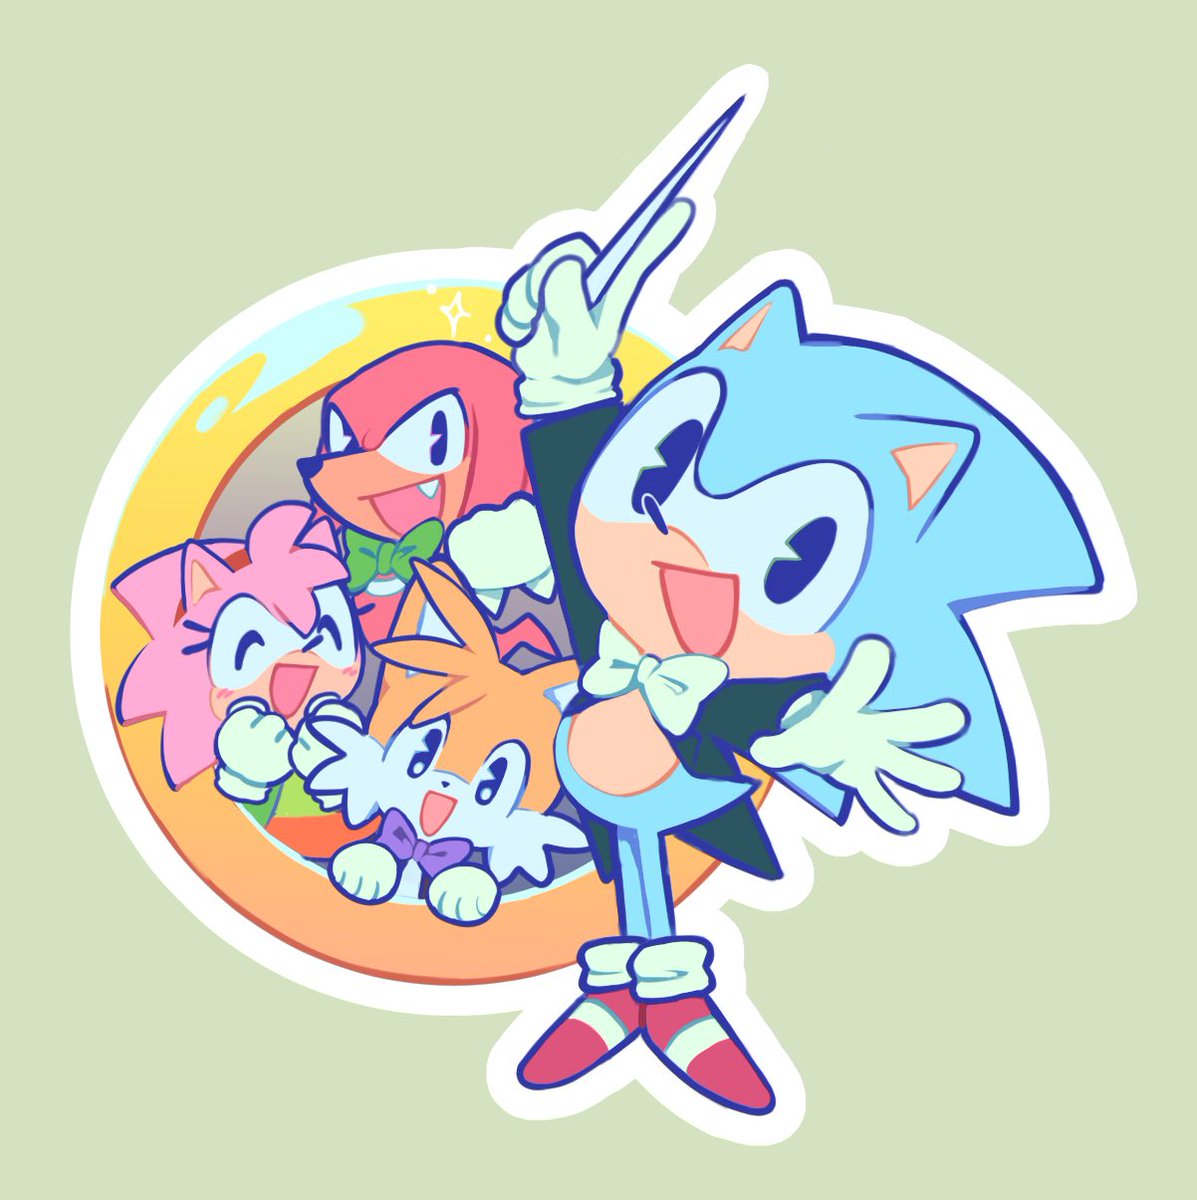 「Excited for sonic symphony tomorrow!! 」|mangohのイラスト